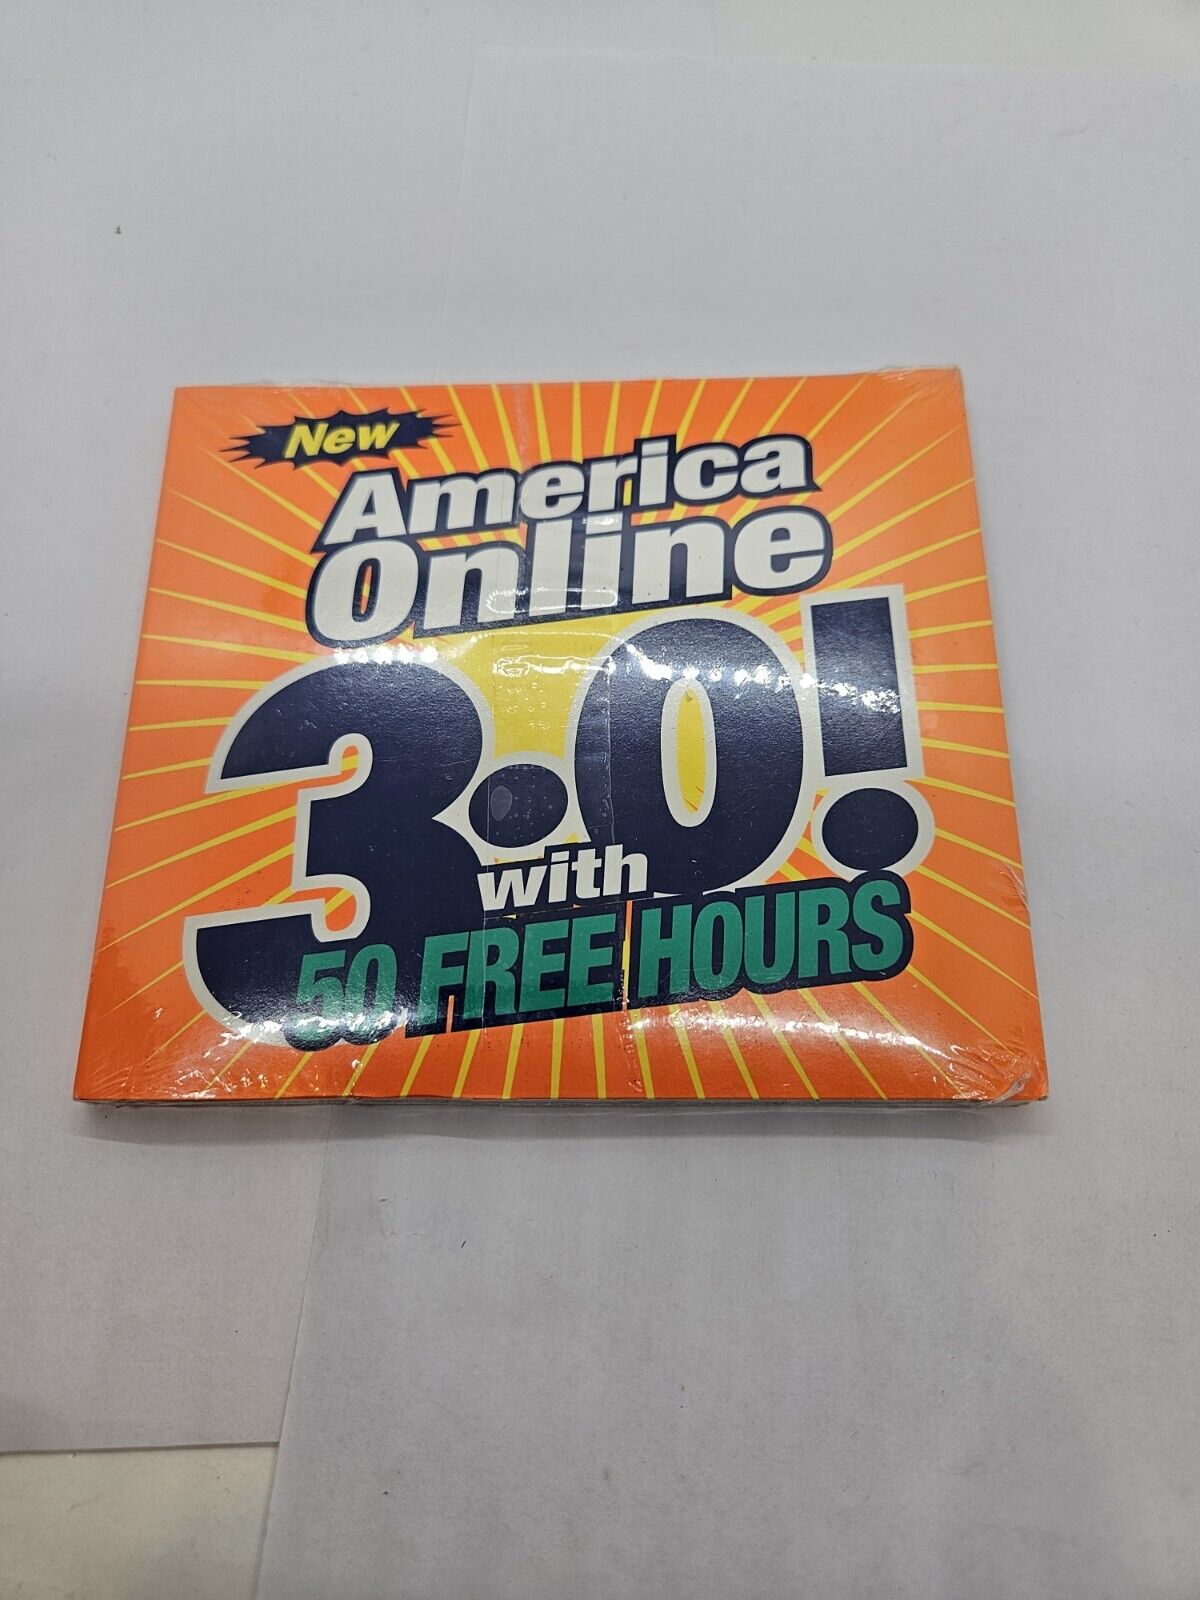 America Online 3.0 Installation Kit (1997) New and Sealed 50 Hours